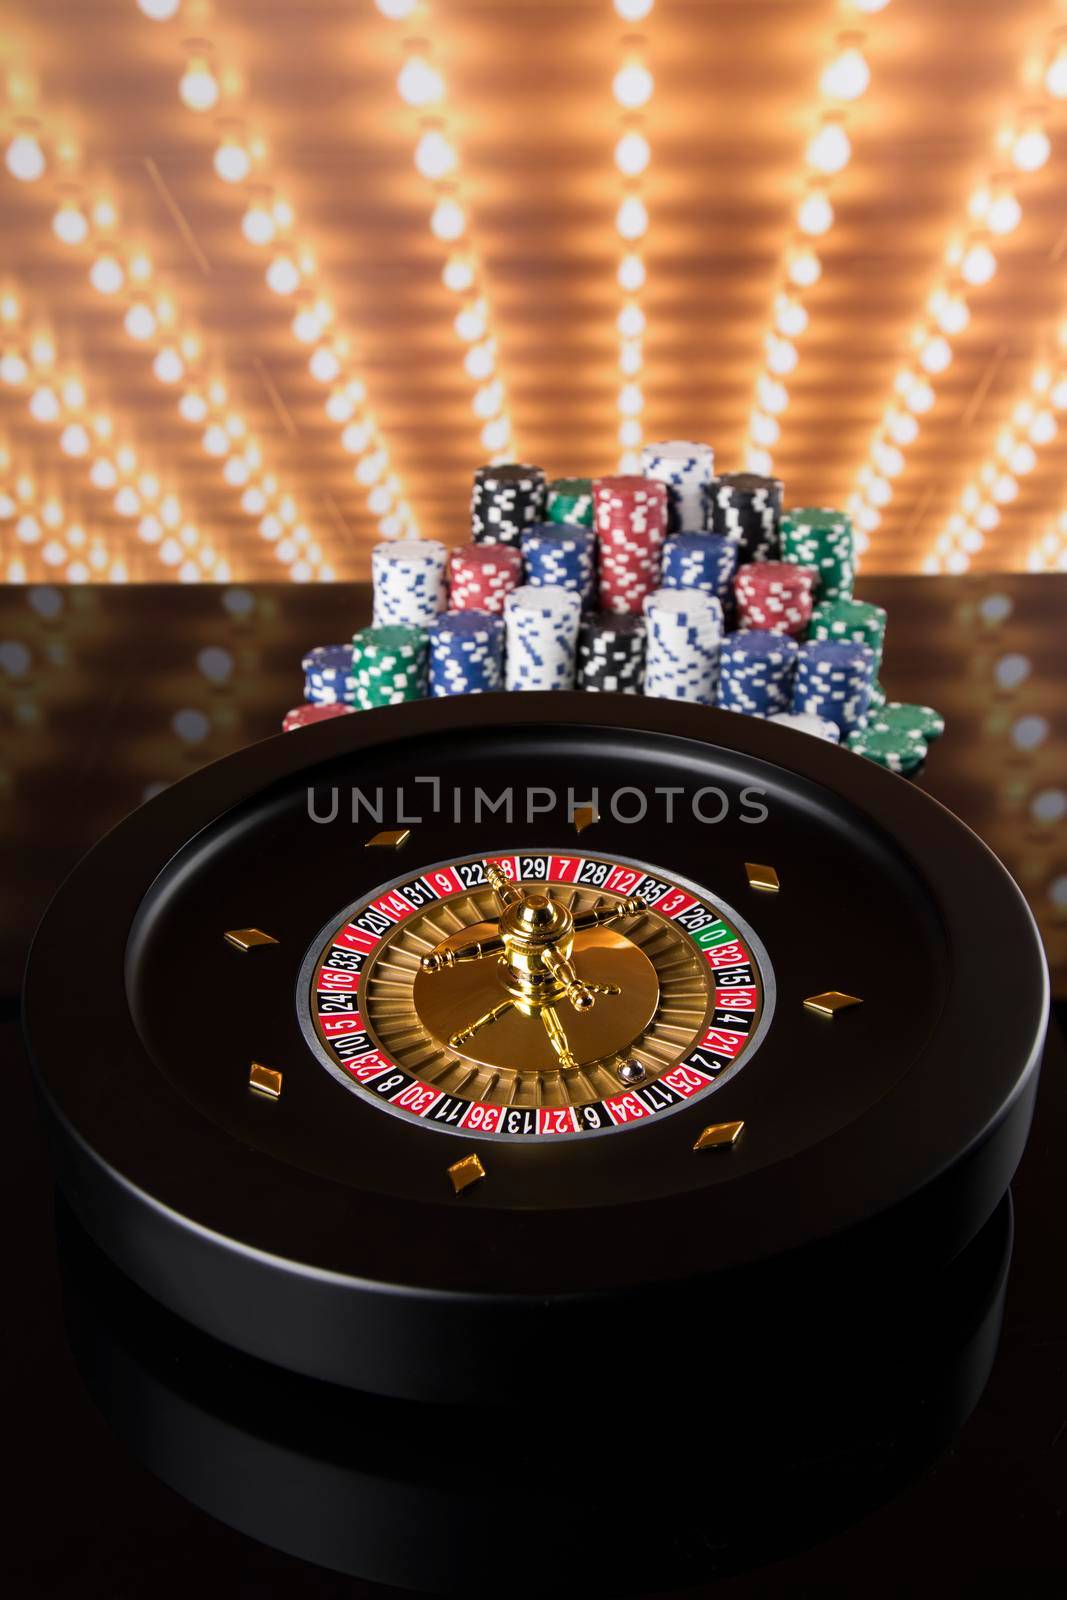 Roulette wheel in motion in a casino background